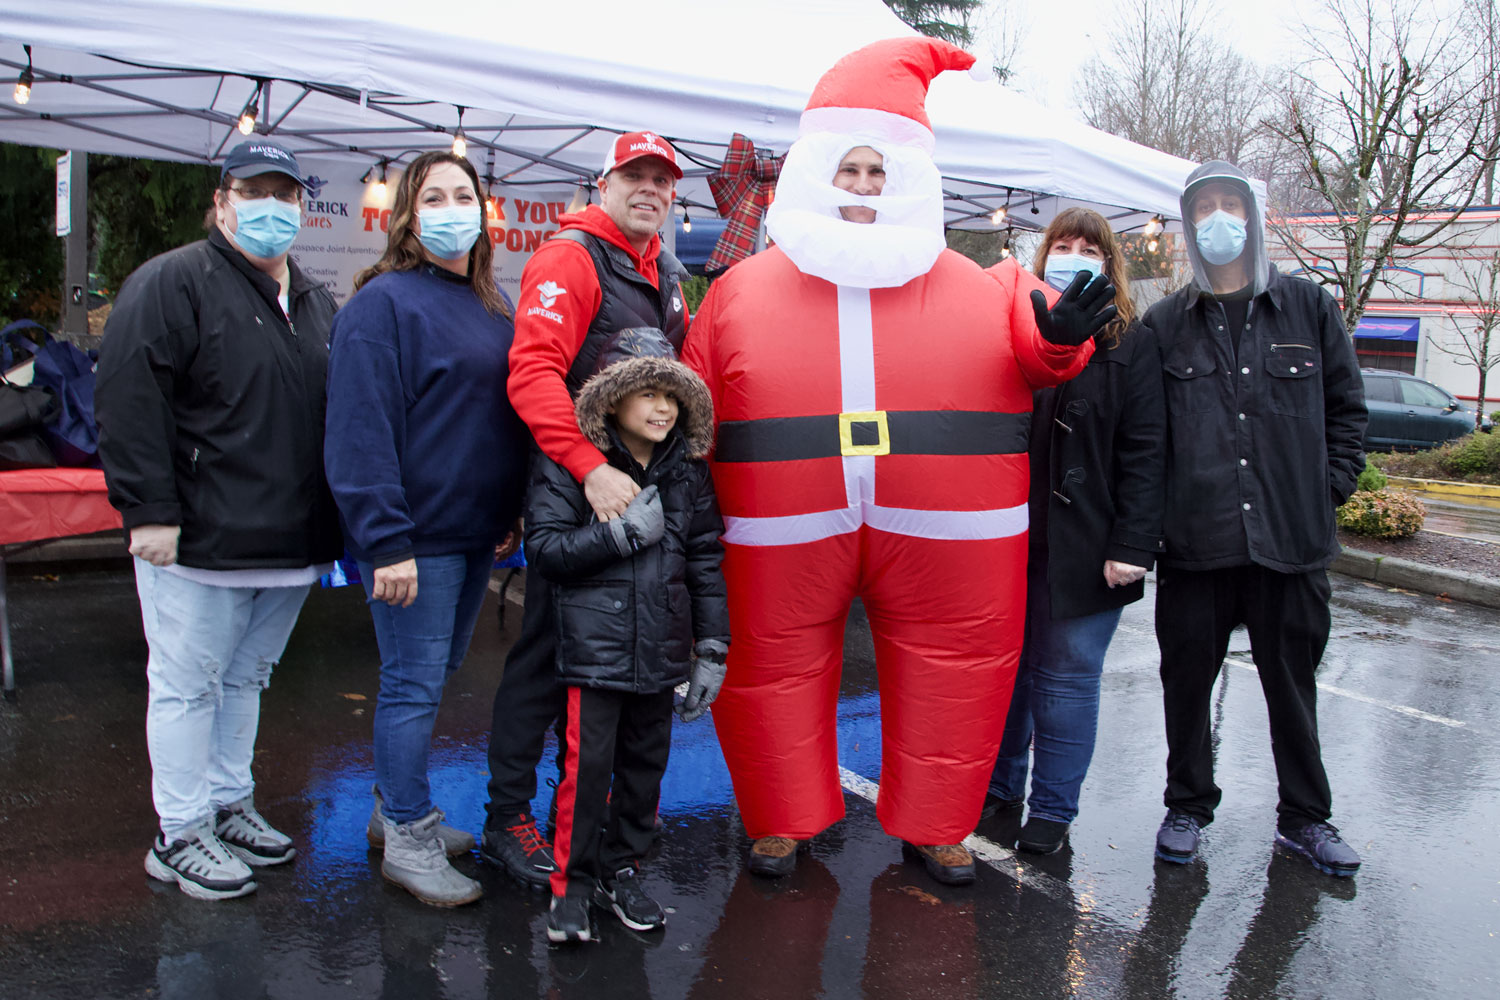 A group of people next to a man dressed like Santa Claus